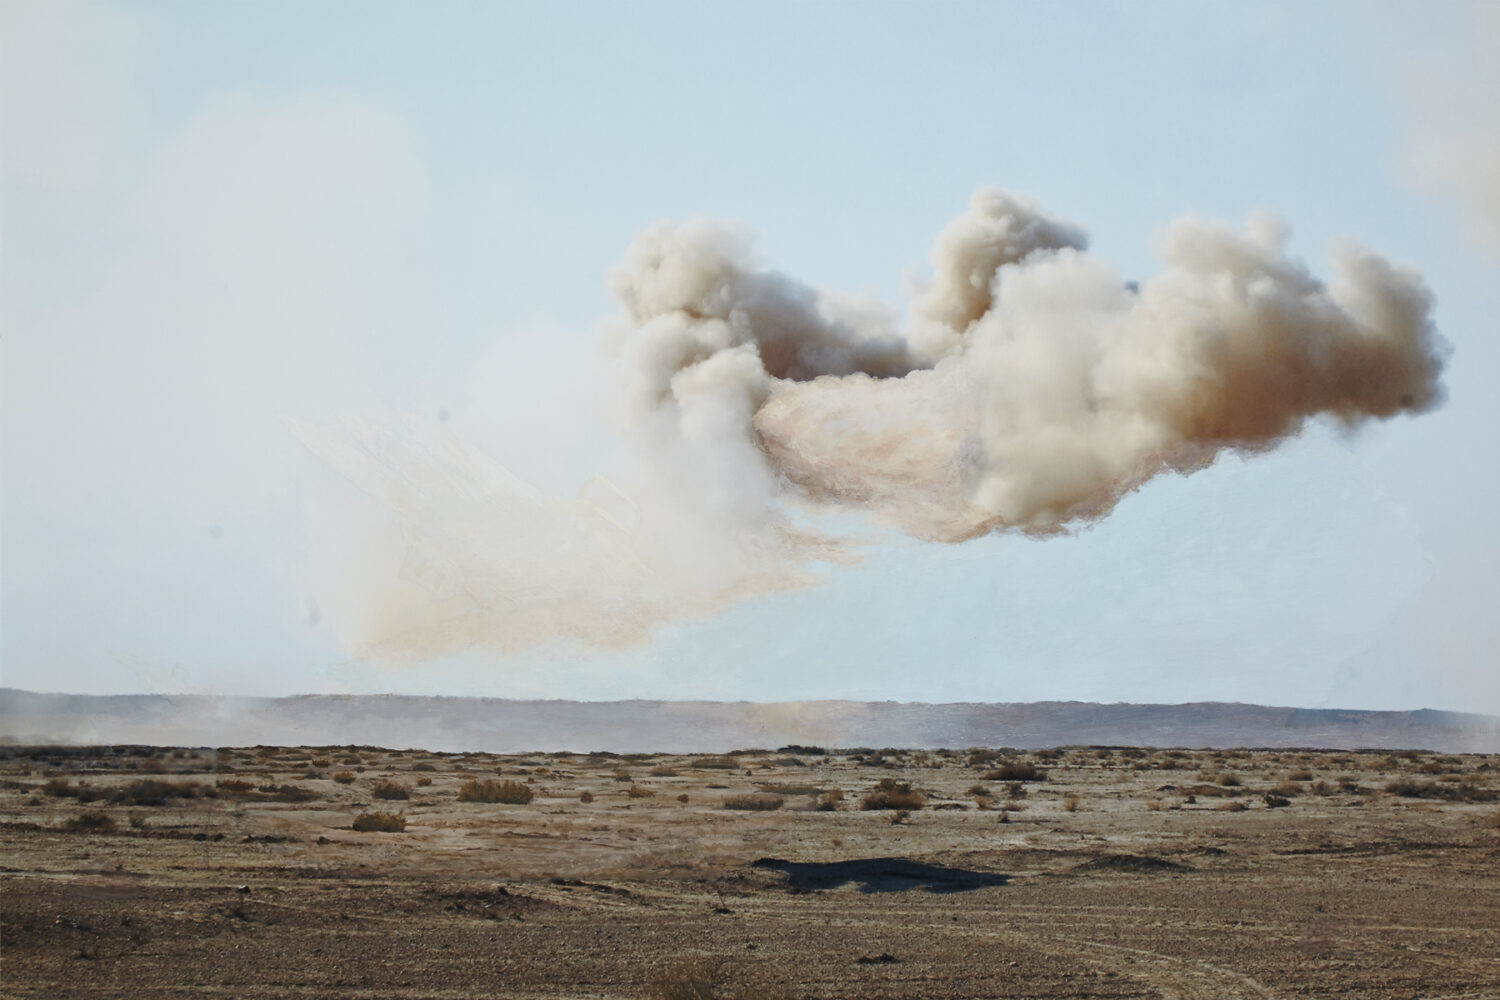 Missile being launched, 60 x 90 cm.